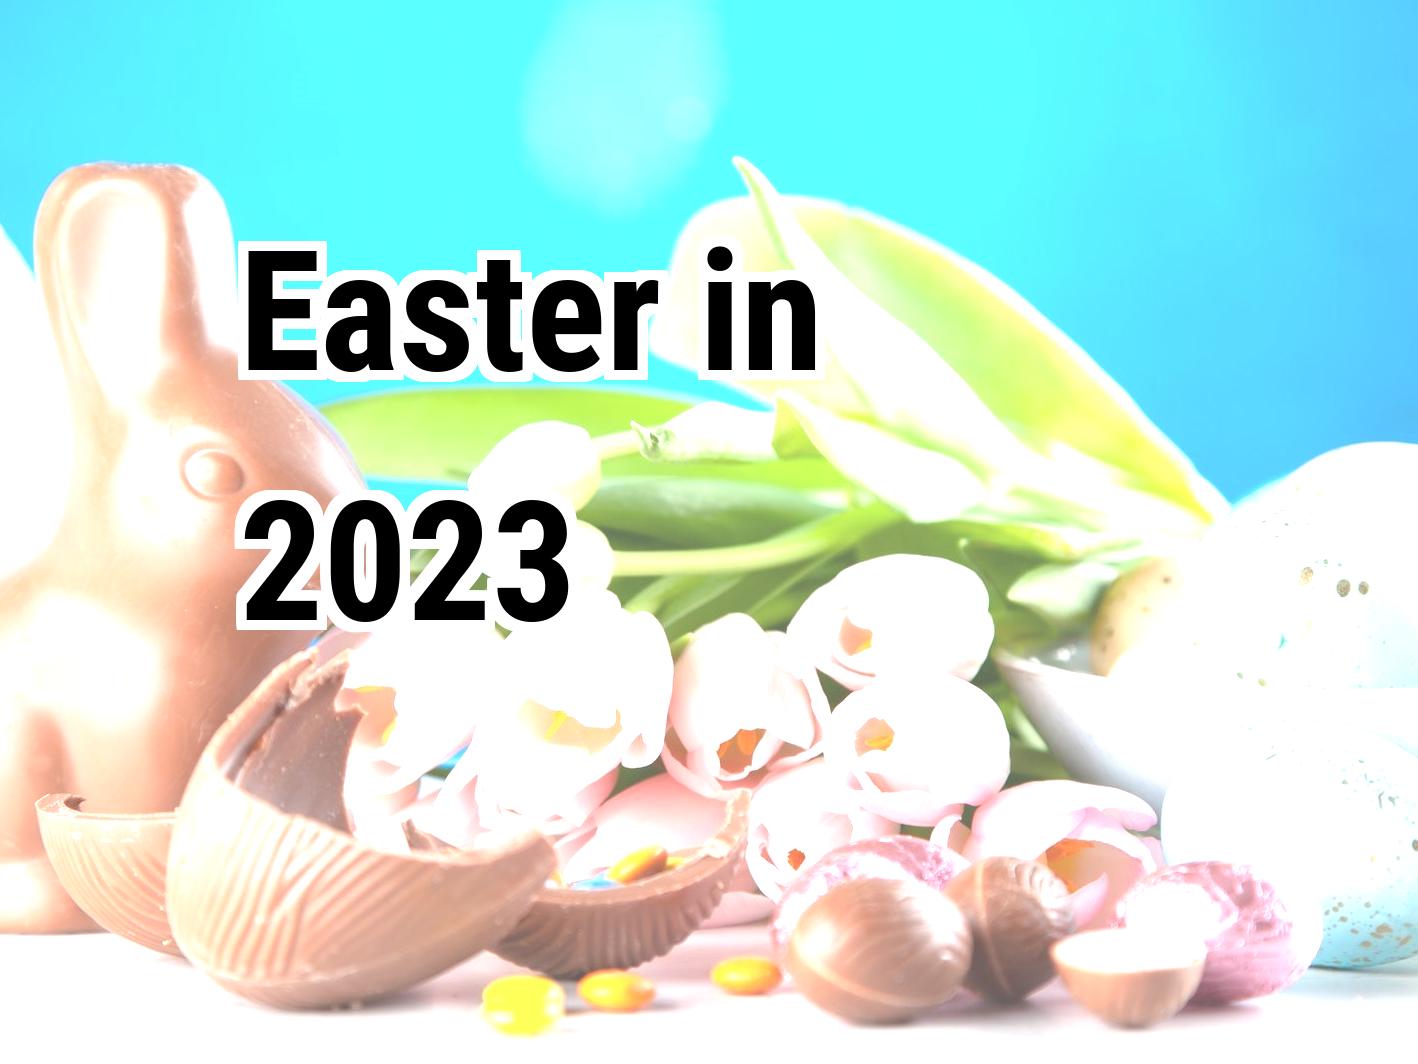 Easter 2023 Sunday When is easter 2023 - Get Latest Easter 2023 Update